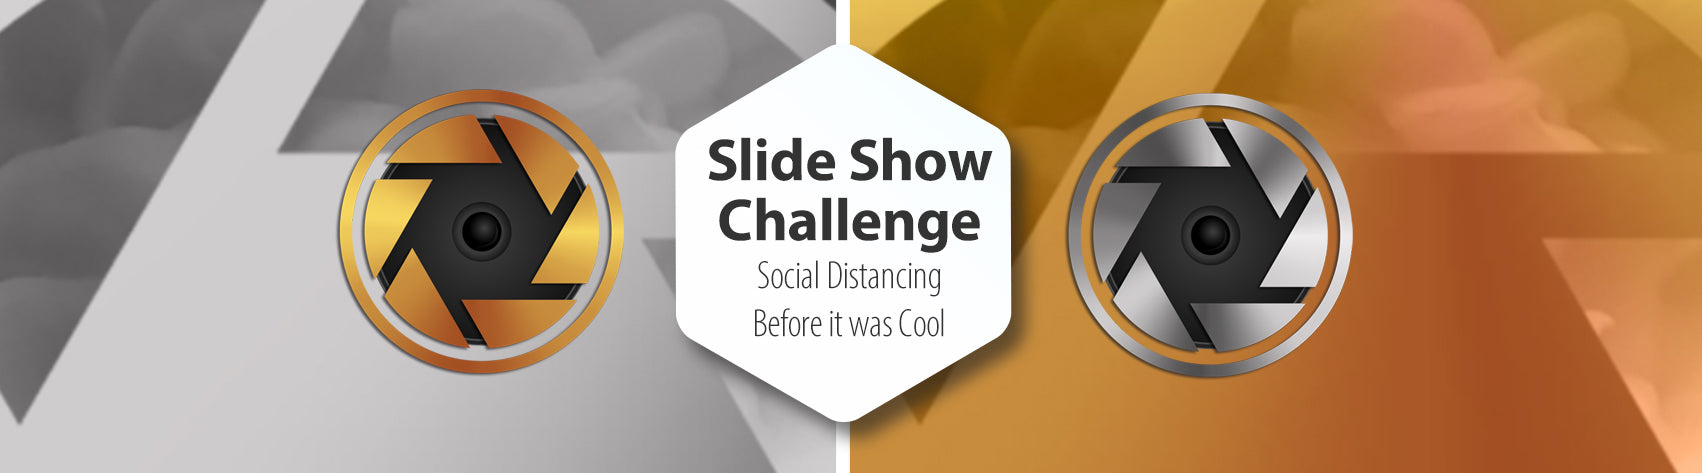 Slide Show Challenge - Social Distancing (before it was cool!)